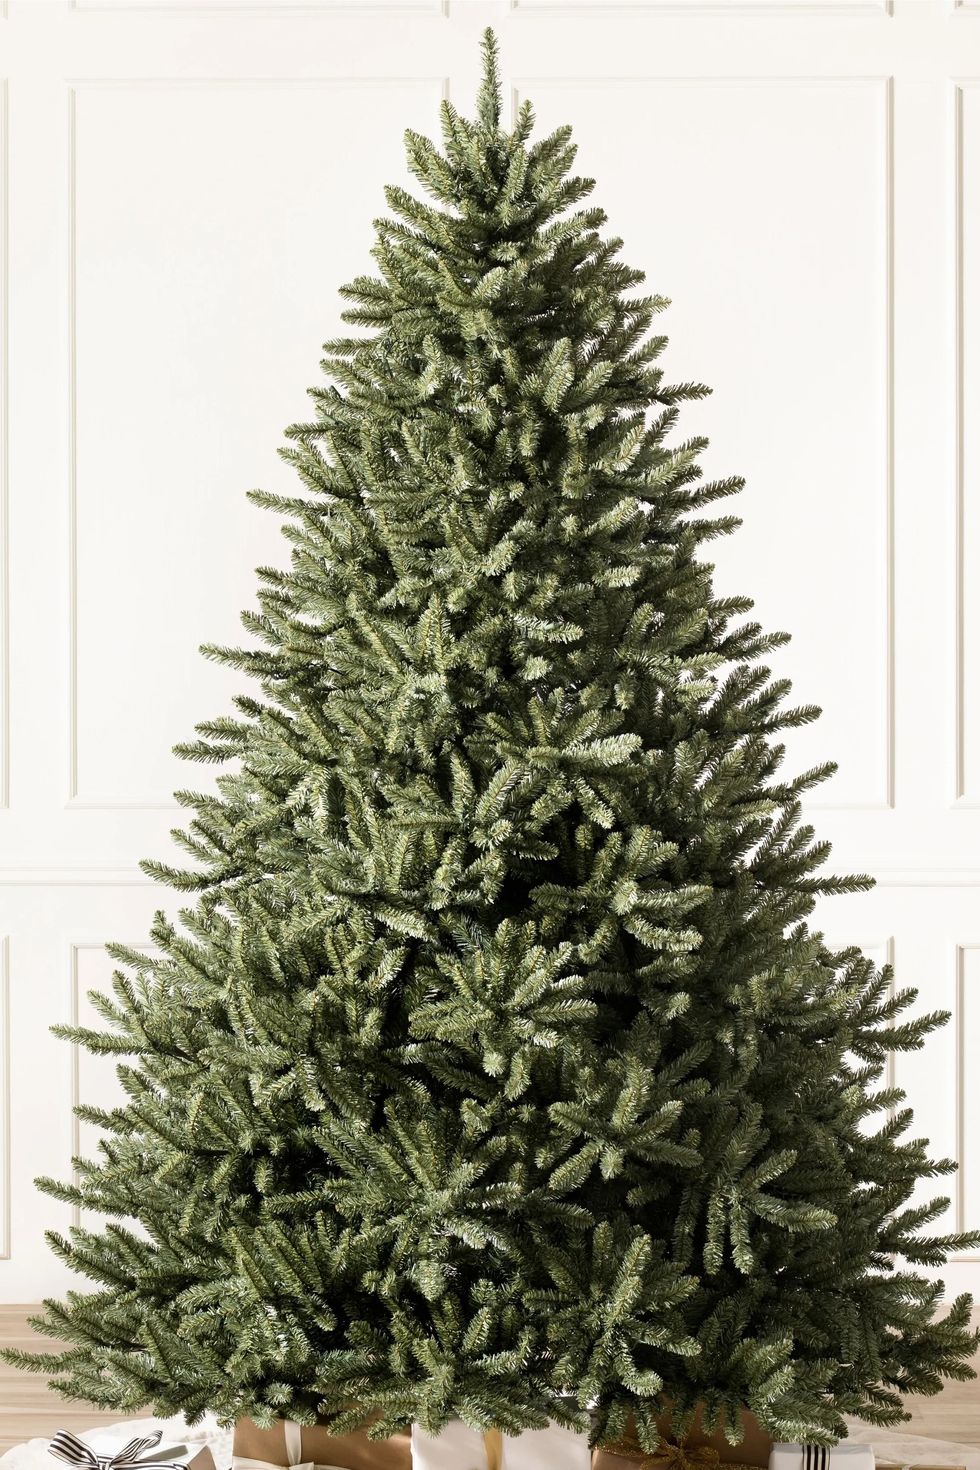 This Fake Christmas Tree Is Beautiful, Simple, and a Great Value. It's Been  Our Pick Since 2016.